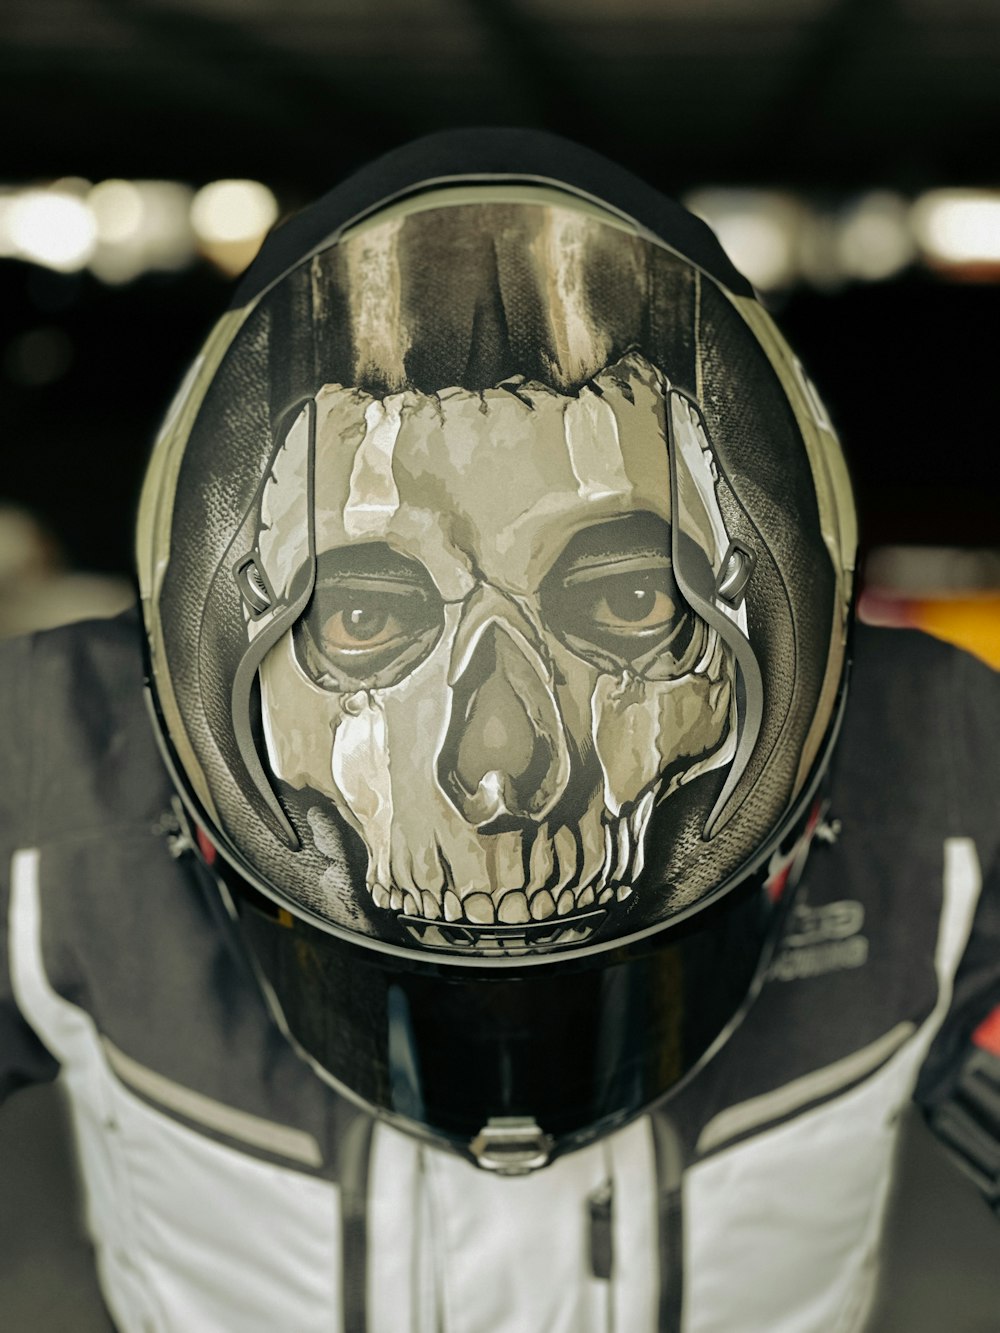 a person wearing a motorcycle helmet with a skull painted on it